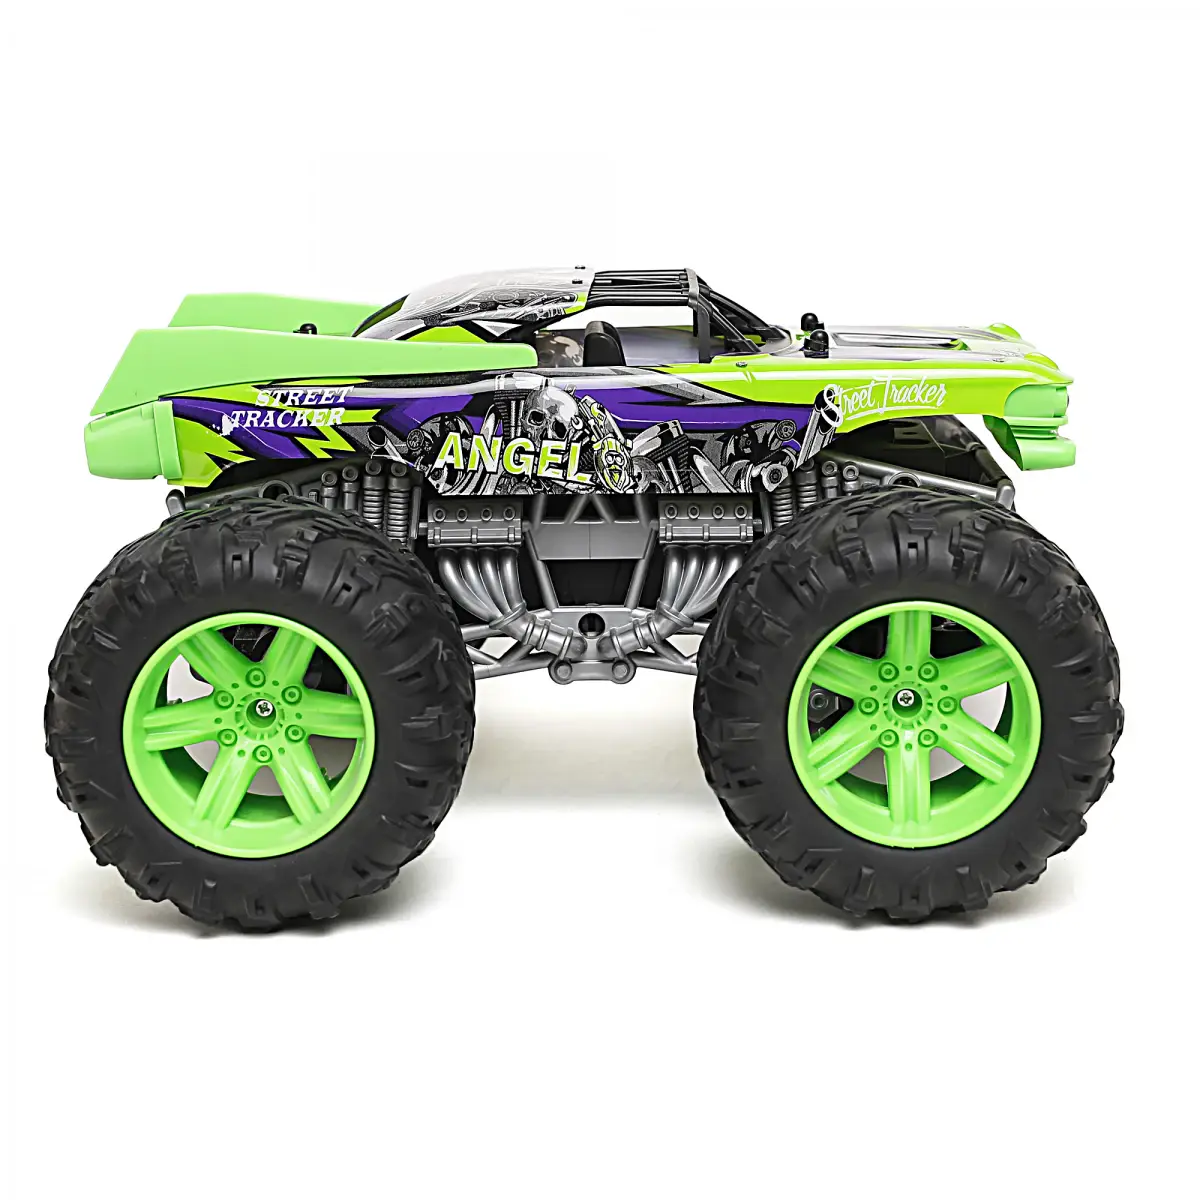 Ralleyz 1:12 Speed Racing Rc Car Grip Wheels With 2.4 Ghz Remote Control, Rechargeable Battery Green 8Y+